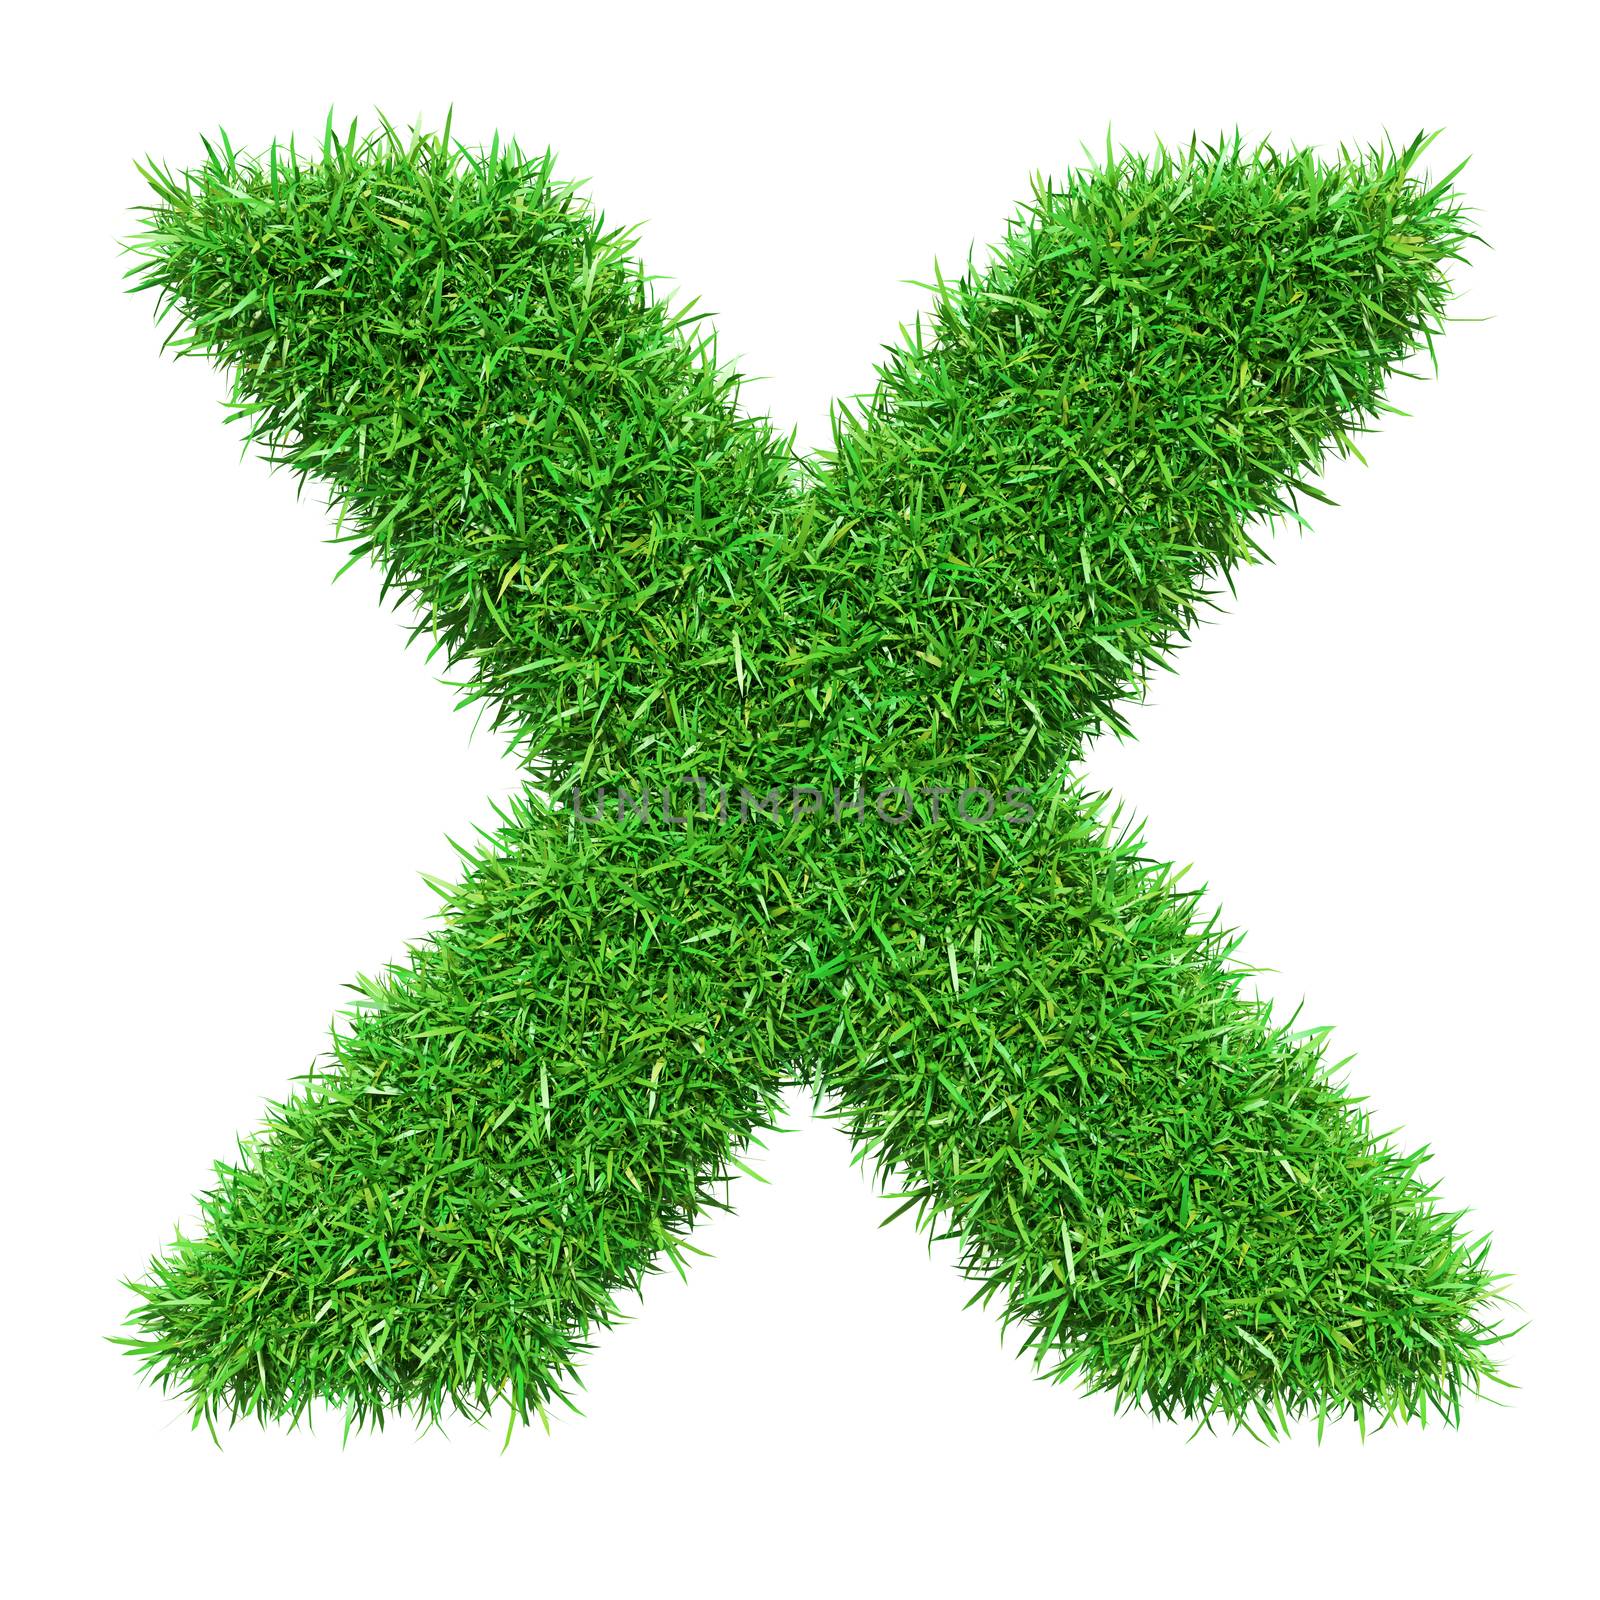 Green Grass Letter X. Isolated On White Background. Font For Your Design. 3D Illustration